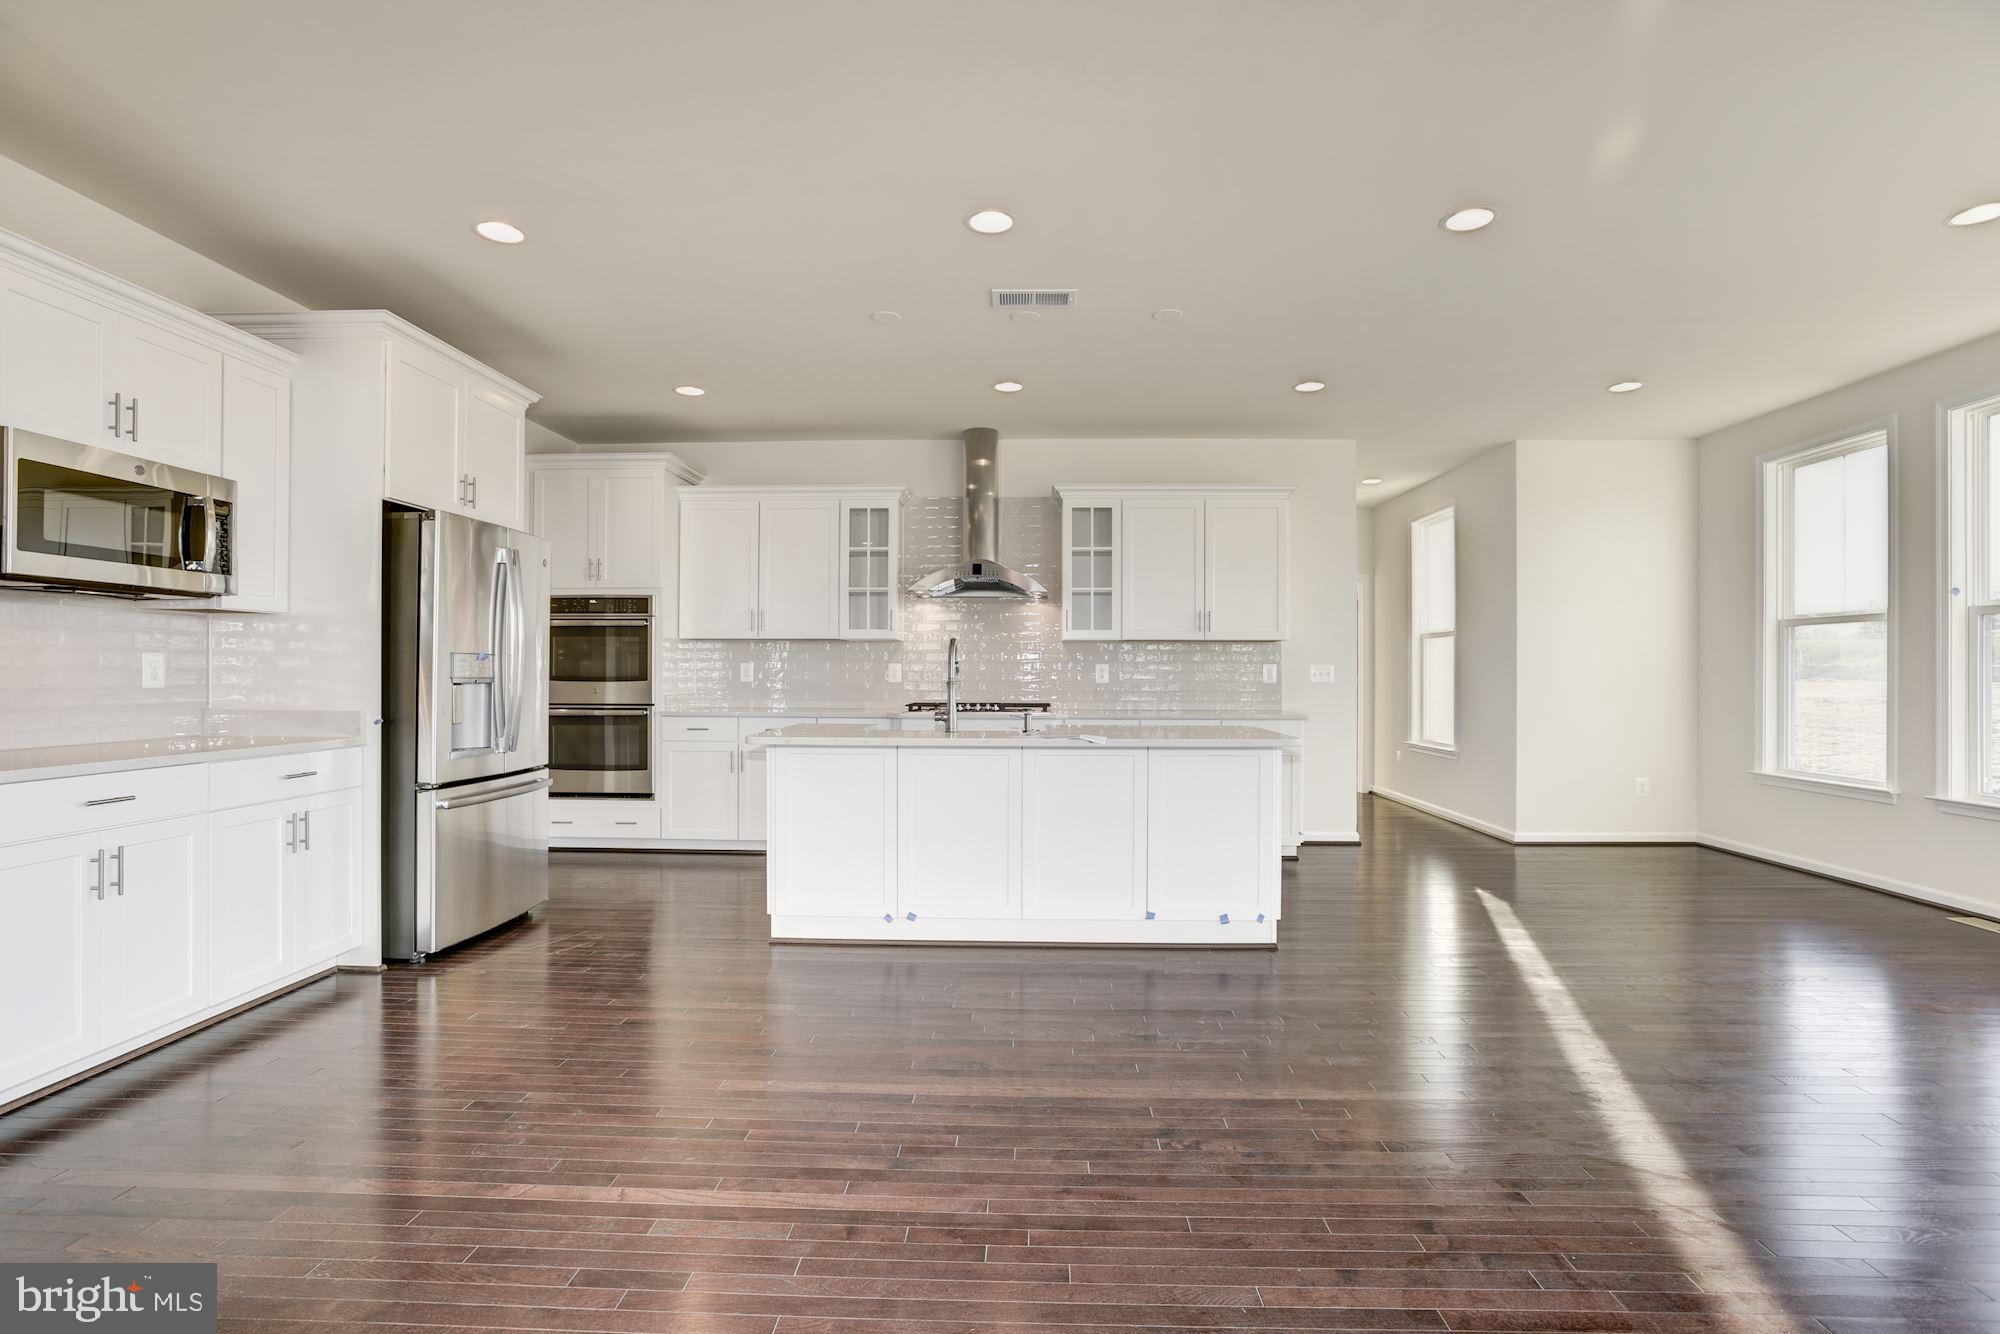 a large kitchen with stainless steel appliances kitchen island wooden cabinets and a refrigerator